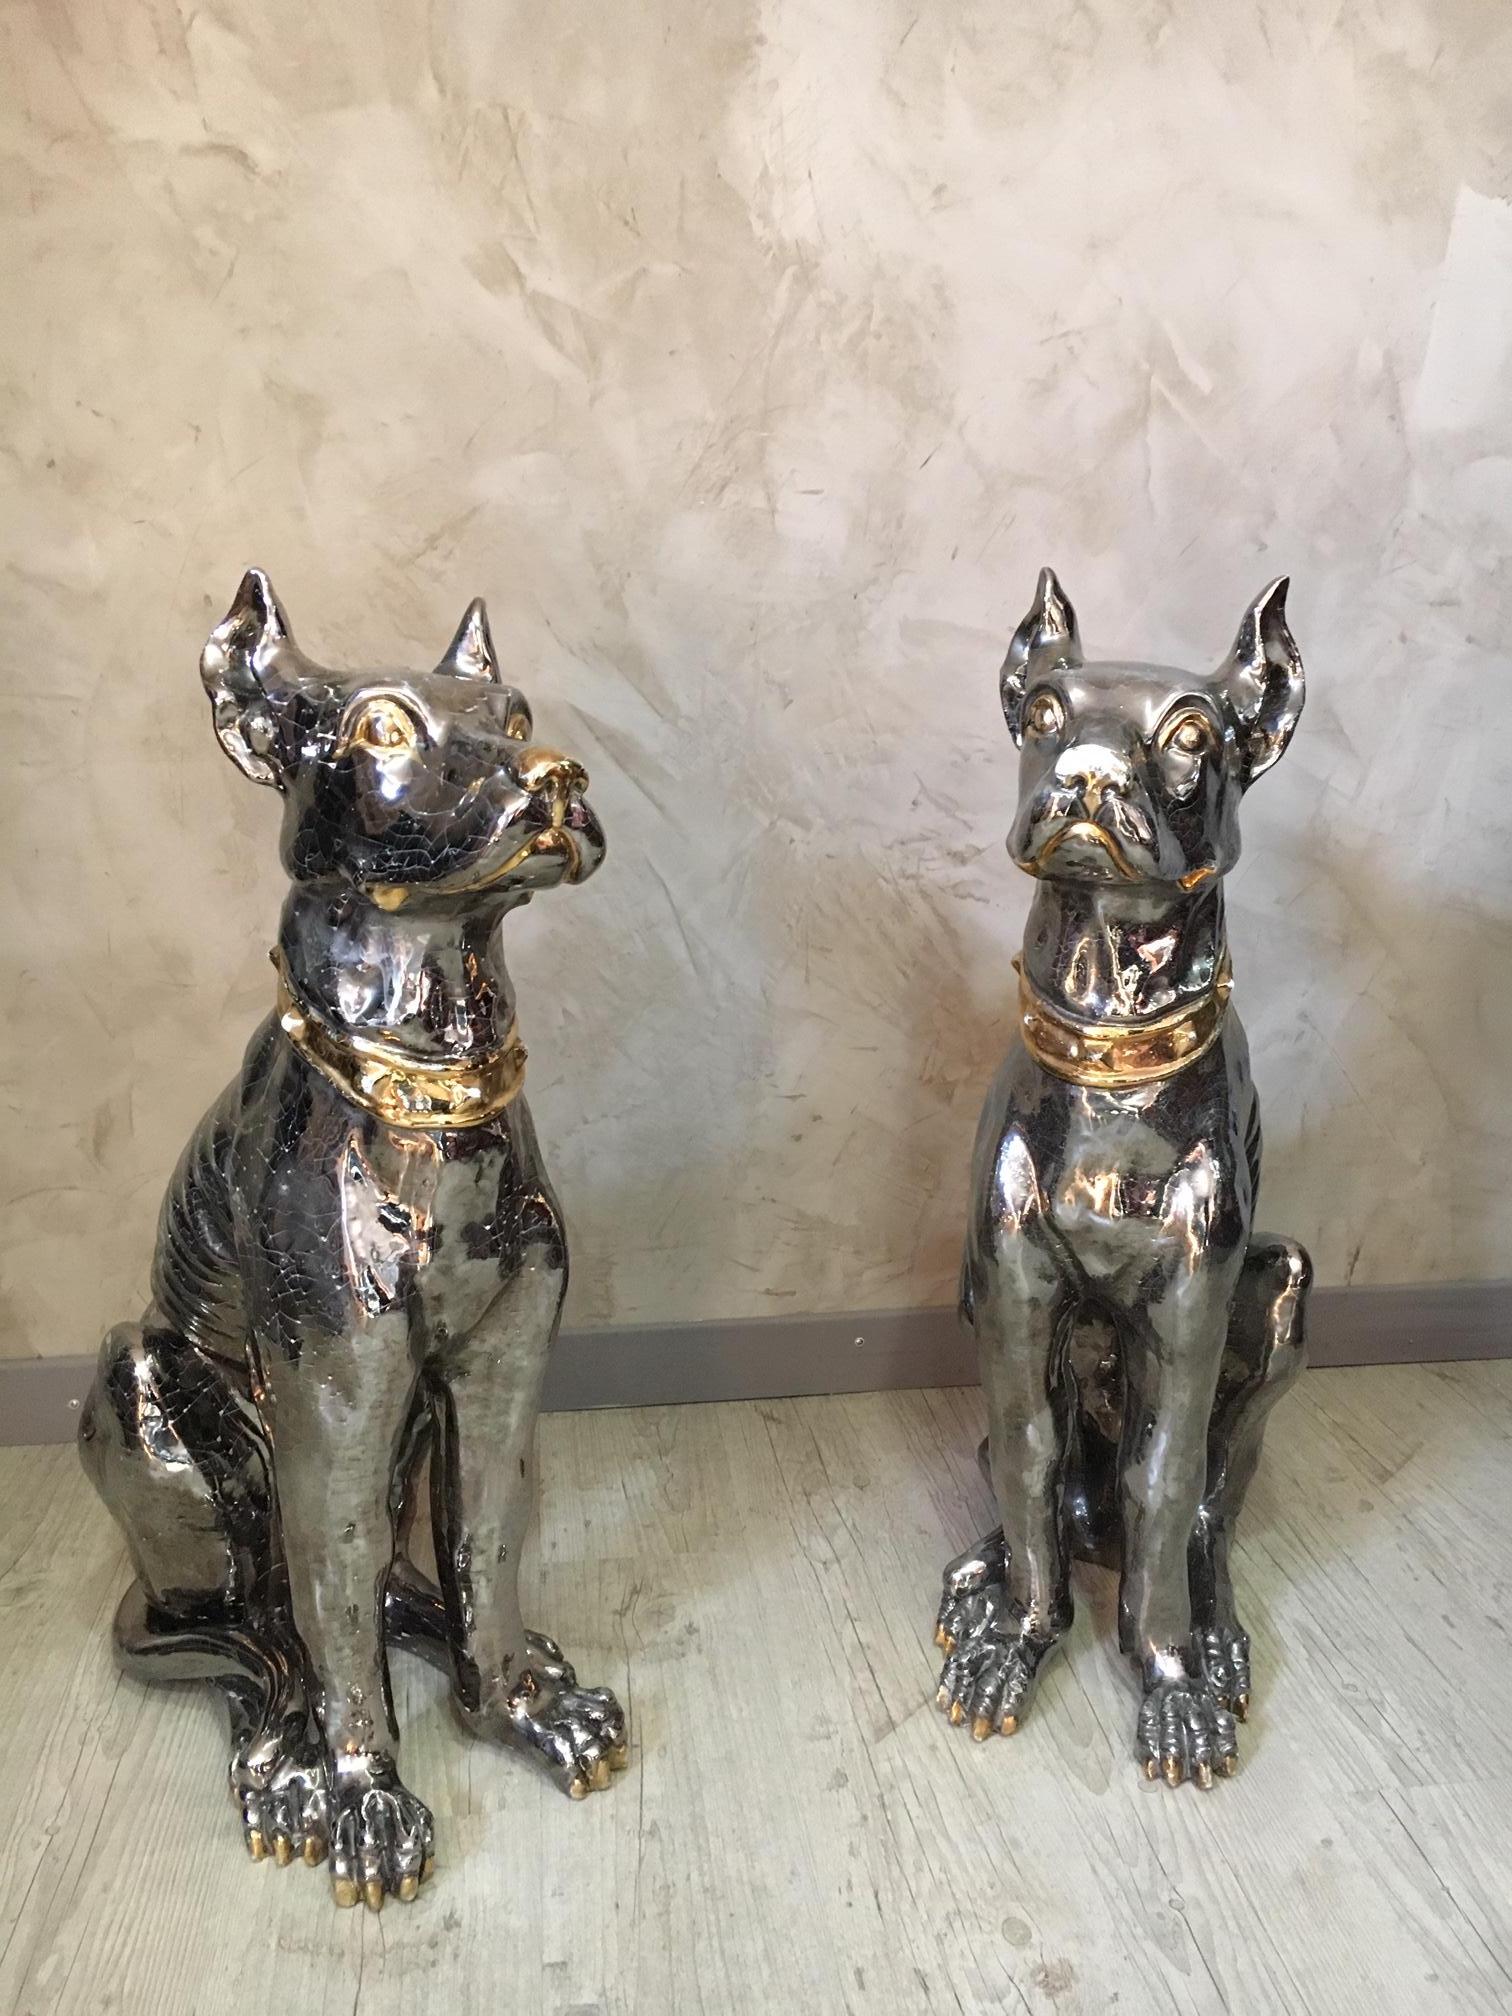 Rare and Exceptionnal 20th century Italian pair of silver and golden patina ceramic dogs (Doberman).
Very good condition except one broken claw.